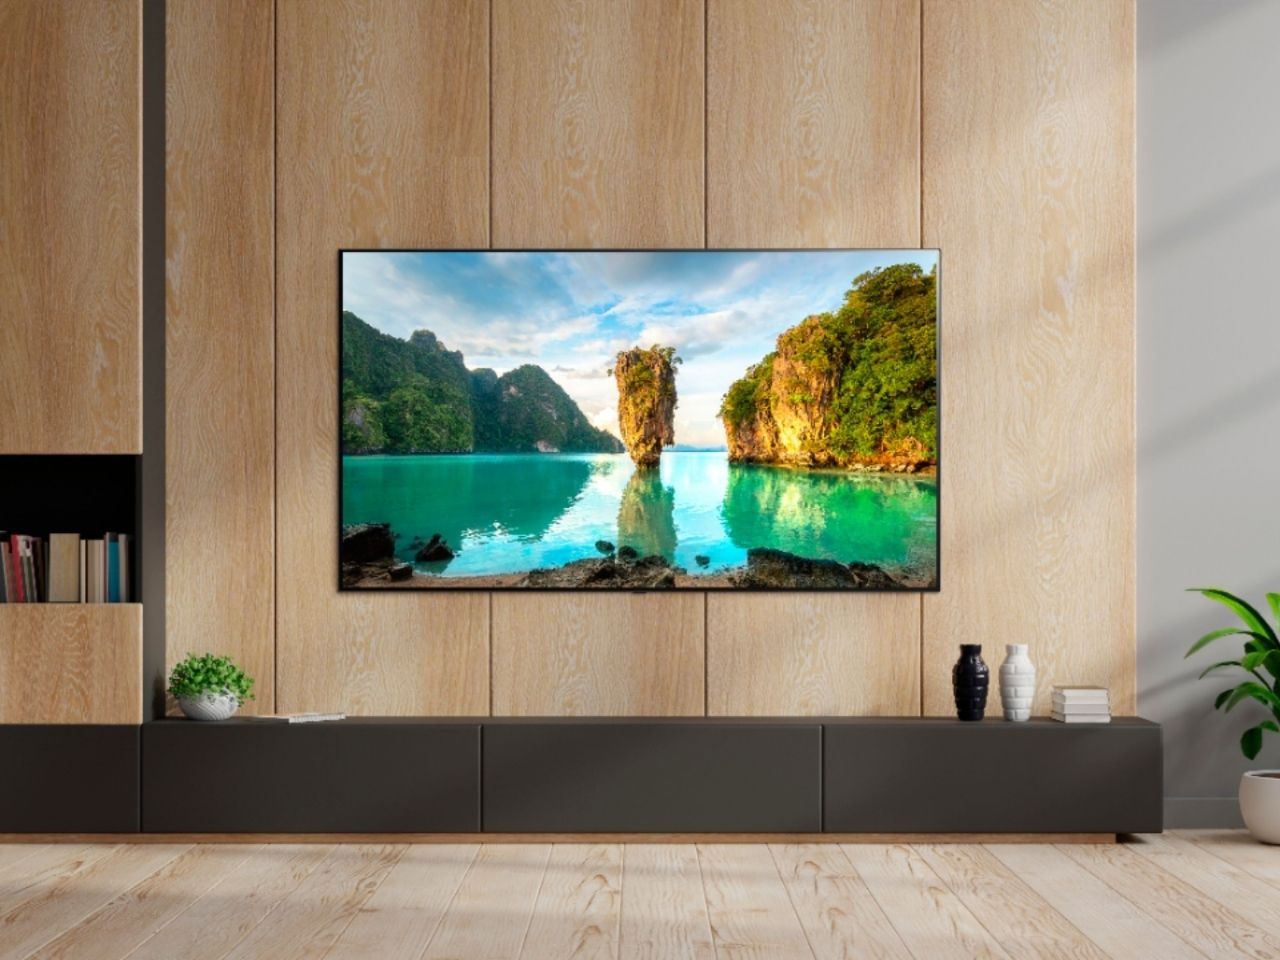 55 - 64 inch TVs - Browse TVs by Screen Size